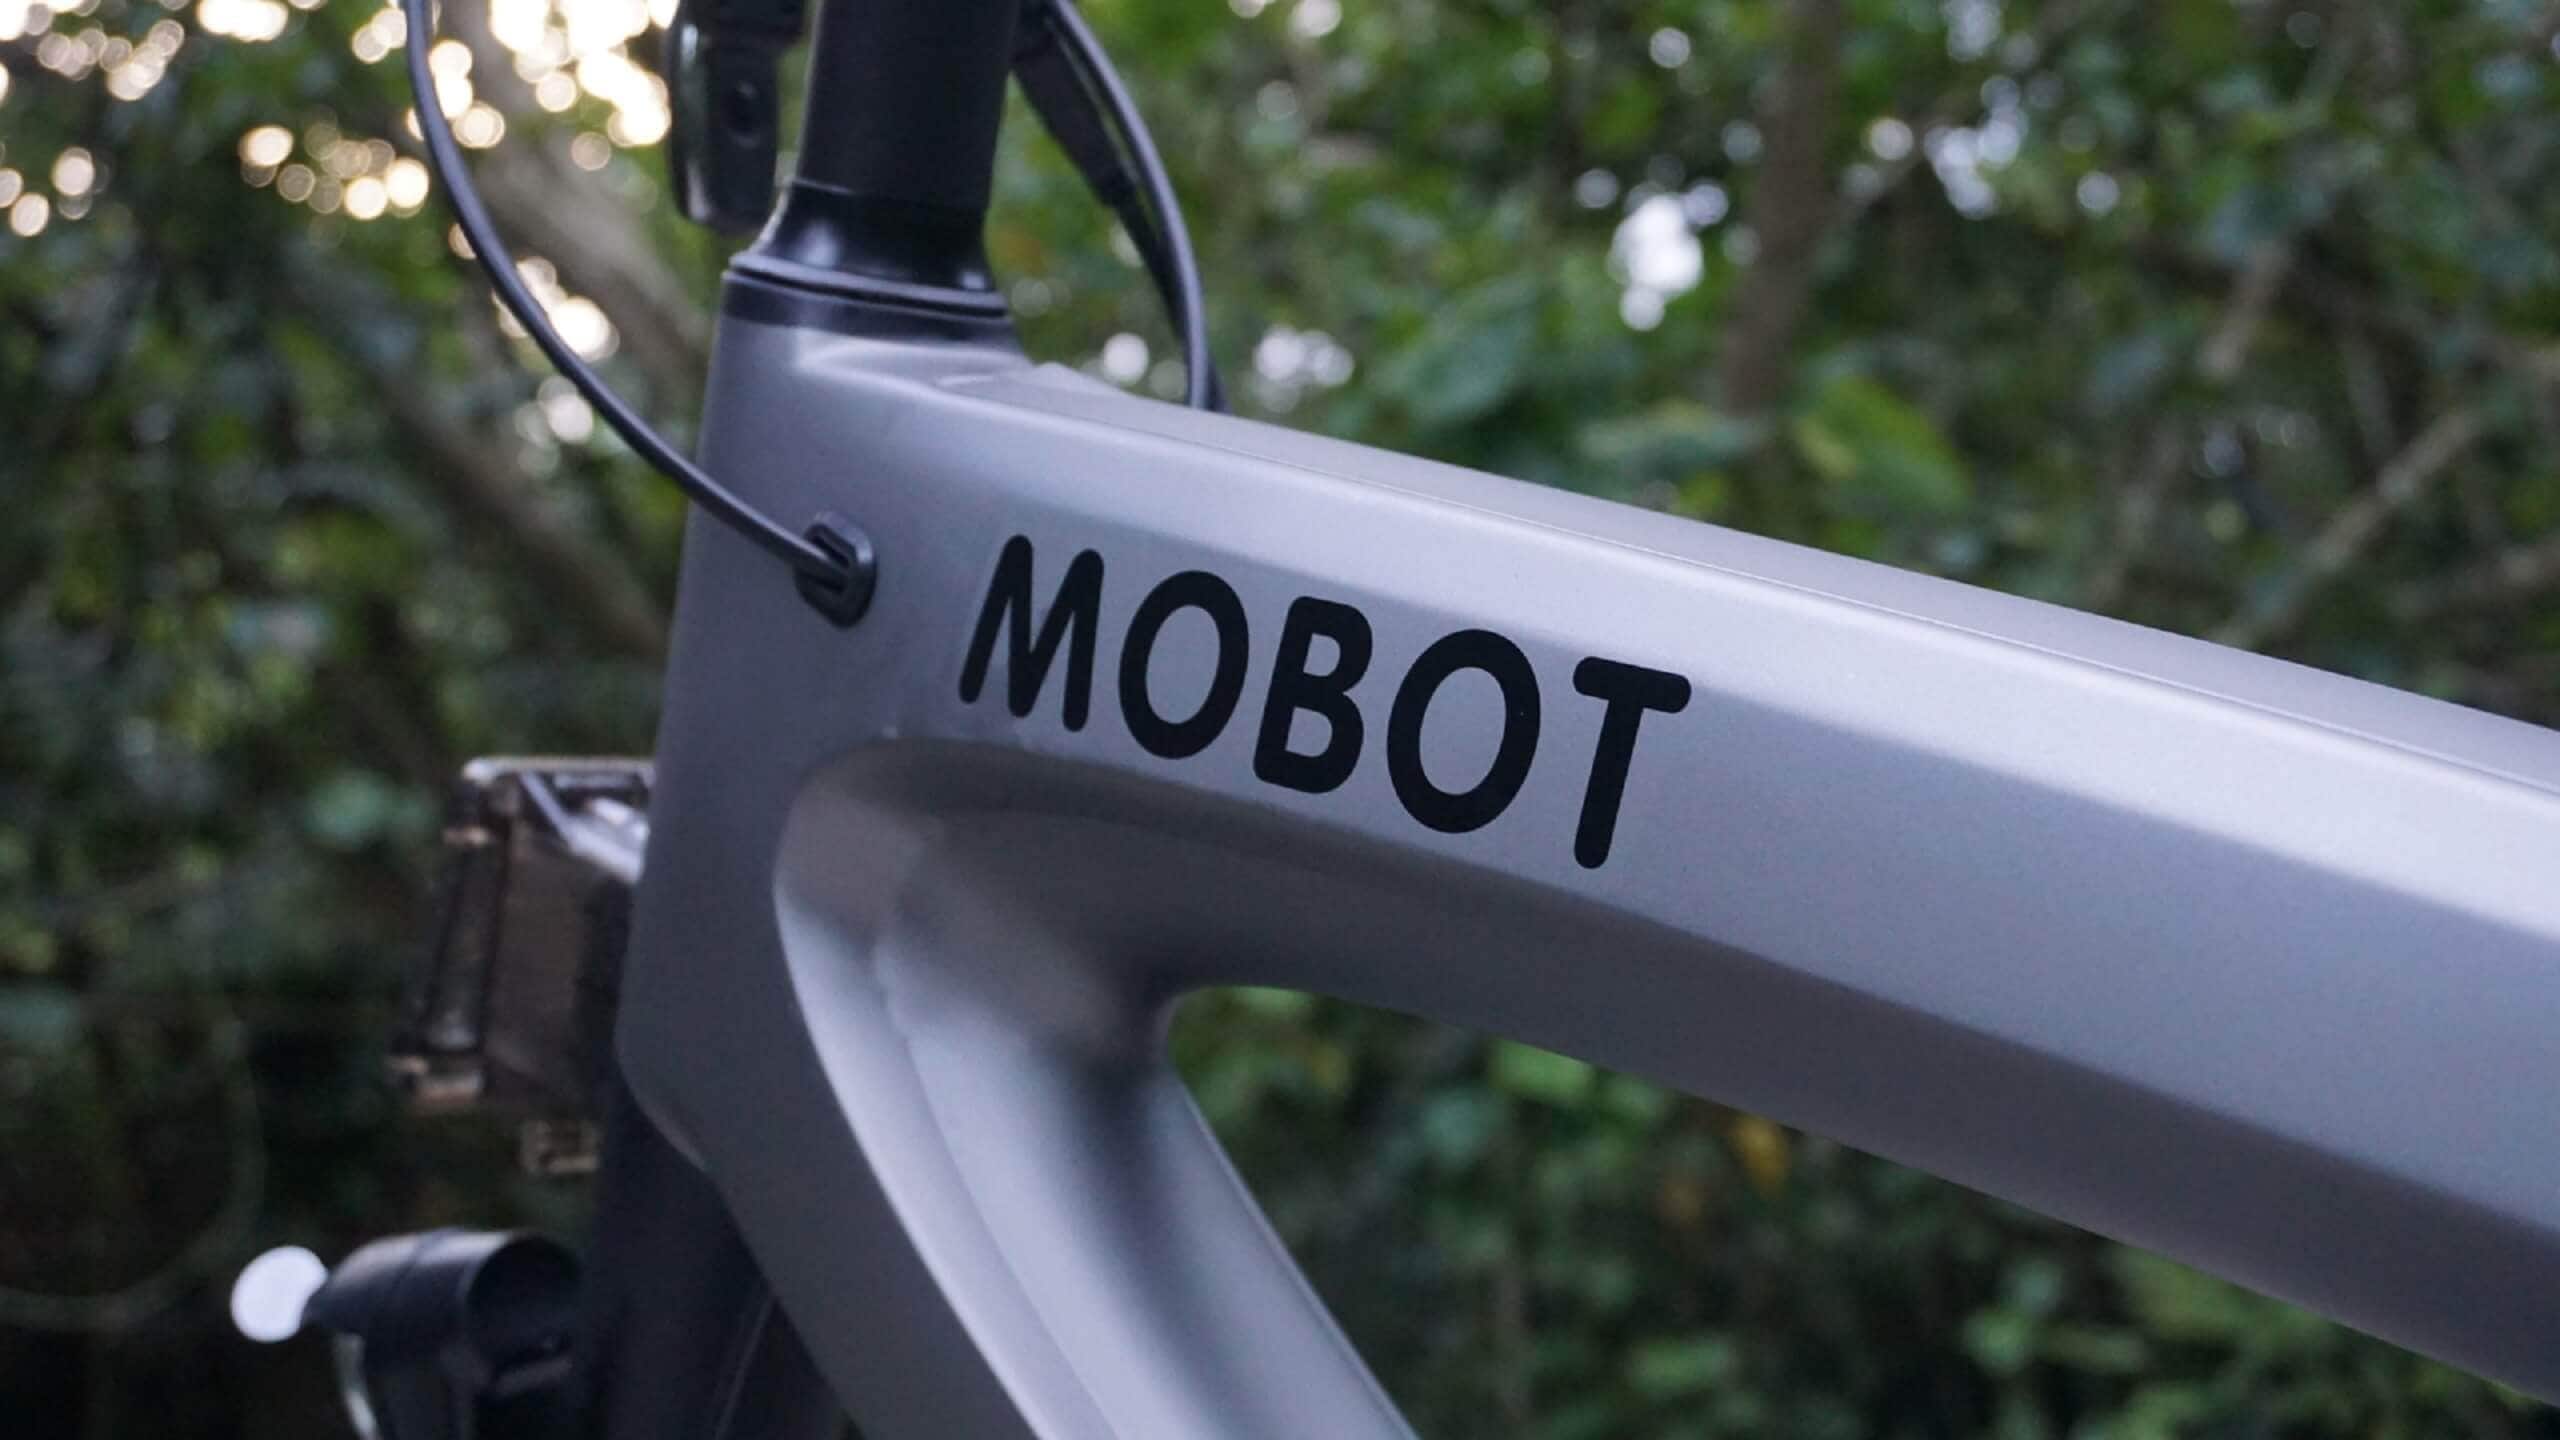 MOBOT OVO (SILVER) LTA approved ebike at Admitalty Park (2)